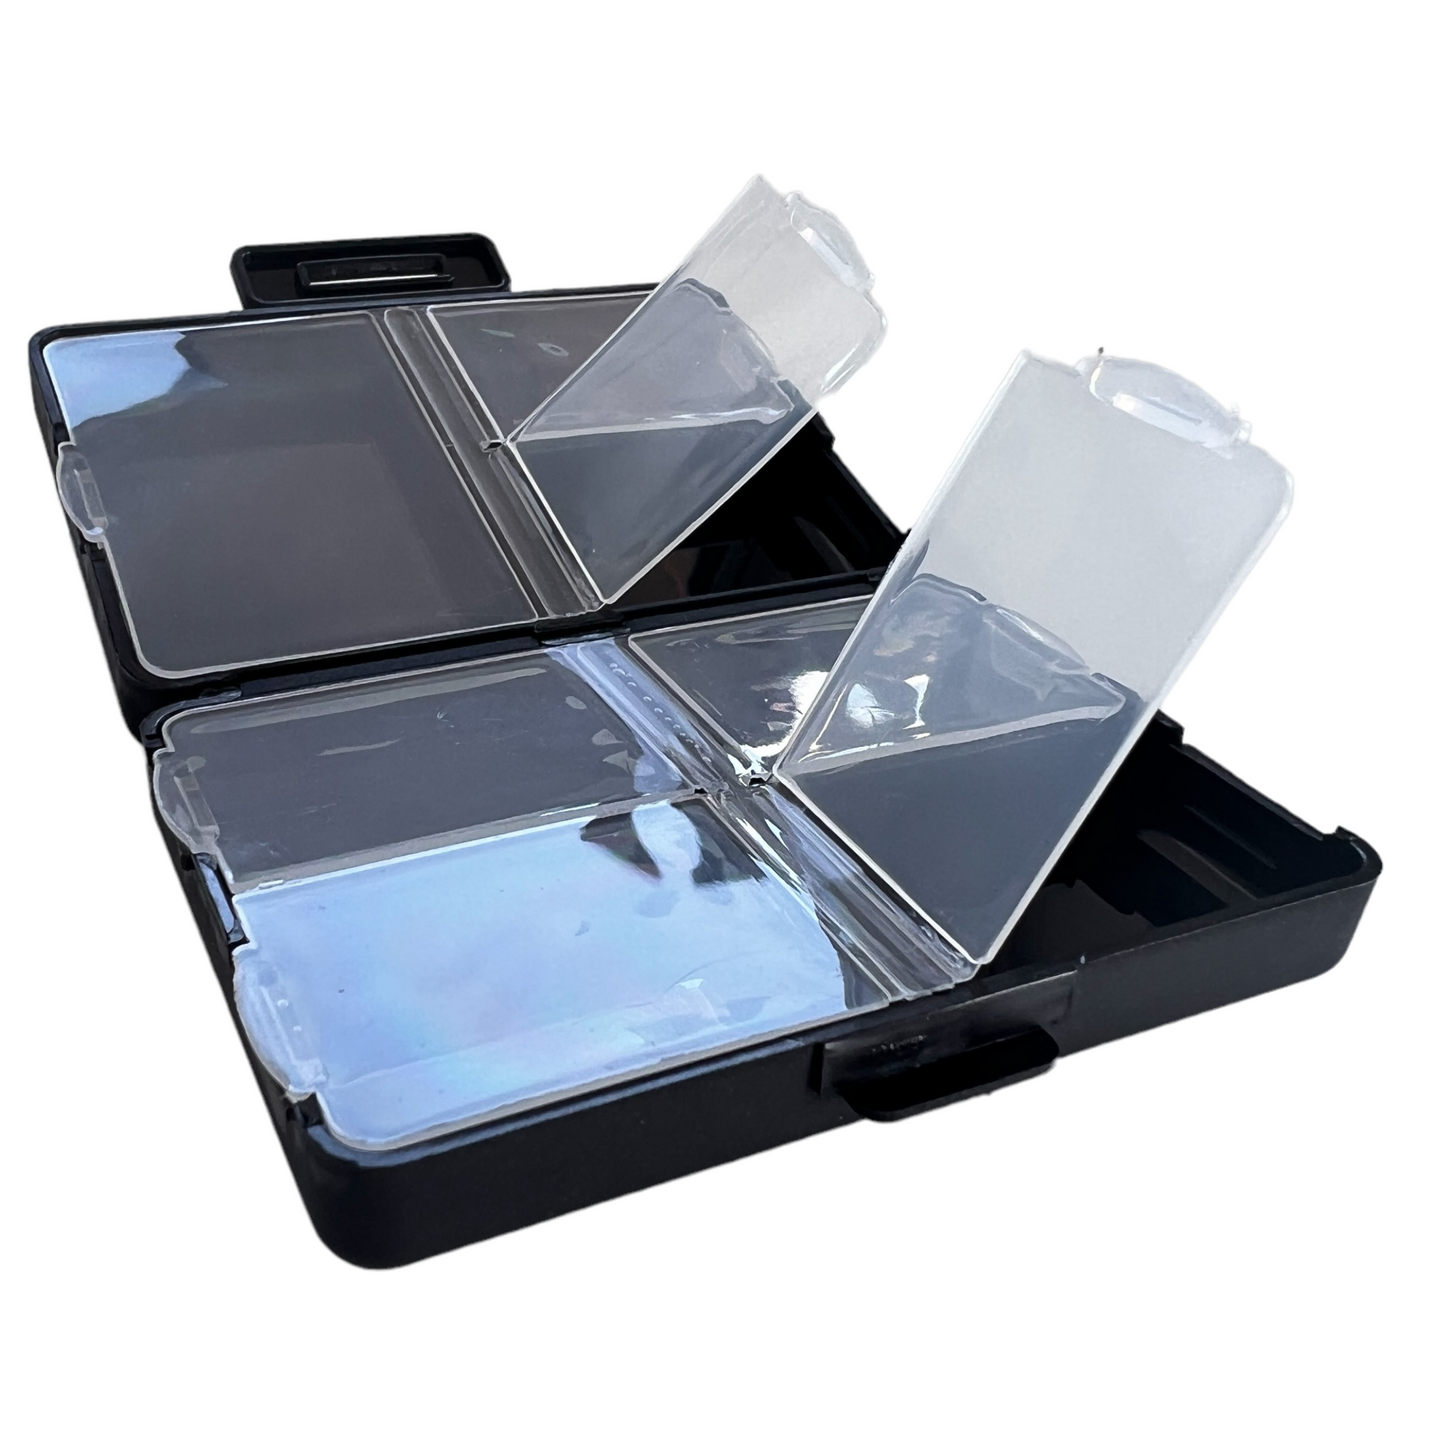 💡❓📏 ‘On-The-Go’ Medical Travel Box - 7 compartments First Aid SPIRIT SPARKPLUGS   